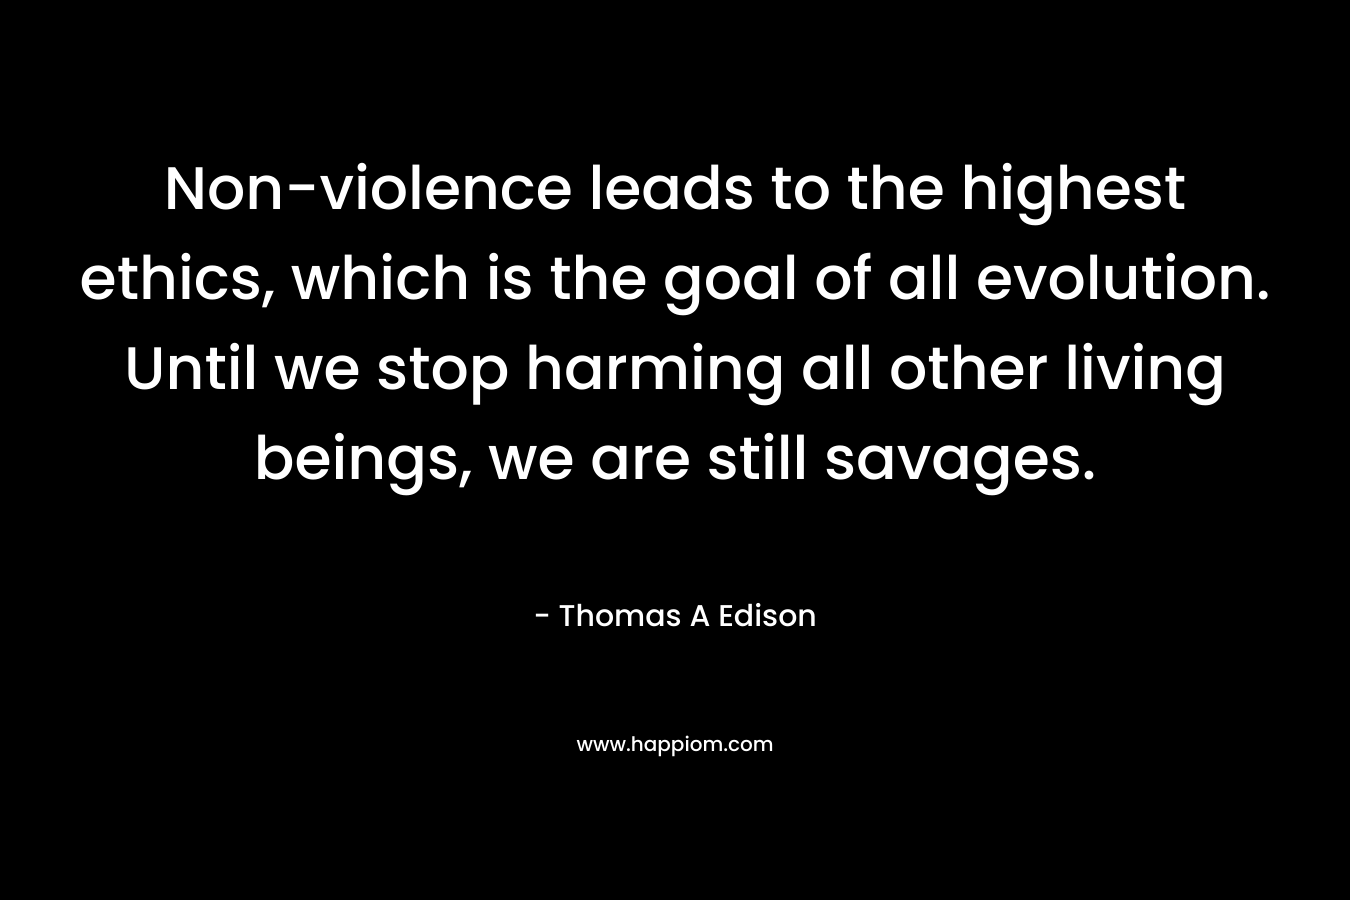 Non-violence leads to the highest ethics, which is the goal of all evolution. Until we stop harming all other living beings, we are still savages. – Thomas A Edison